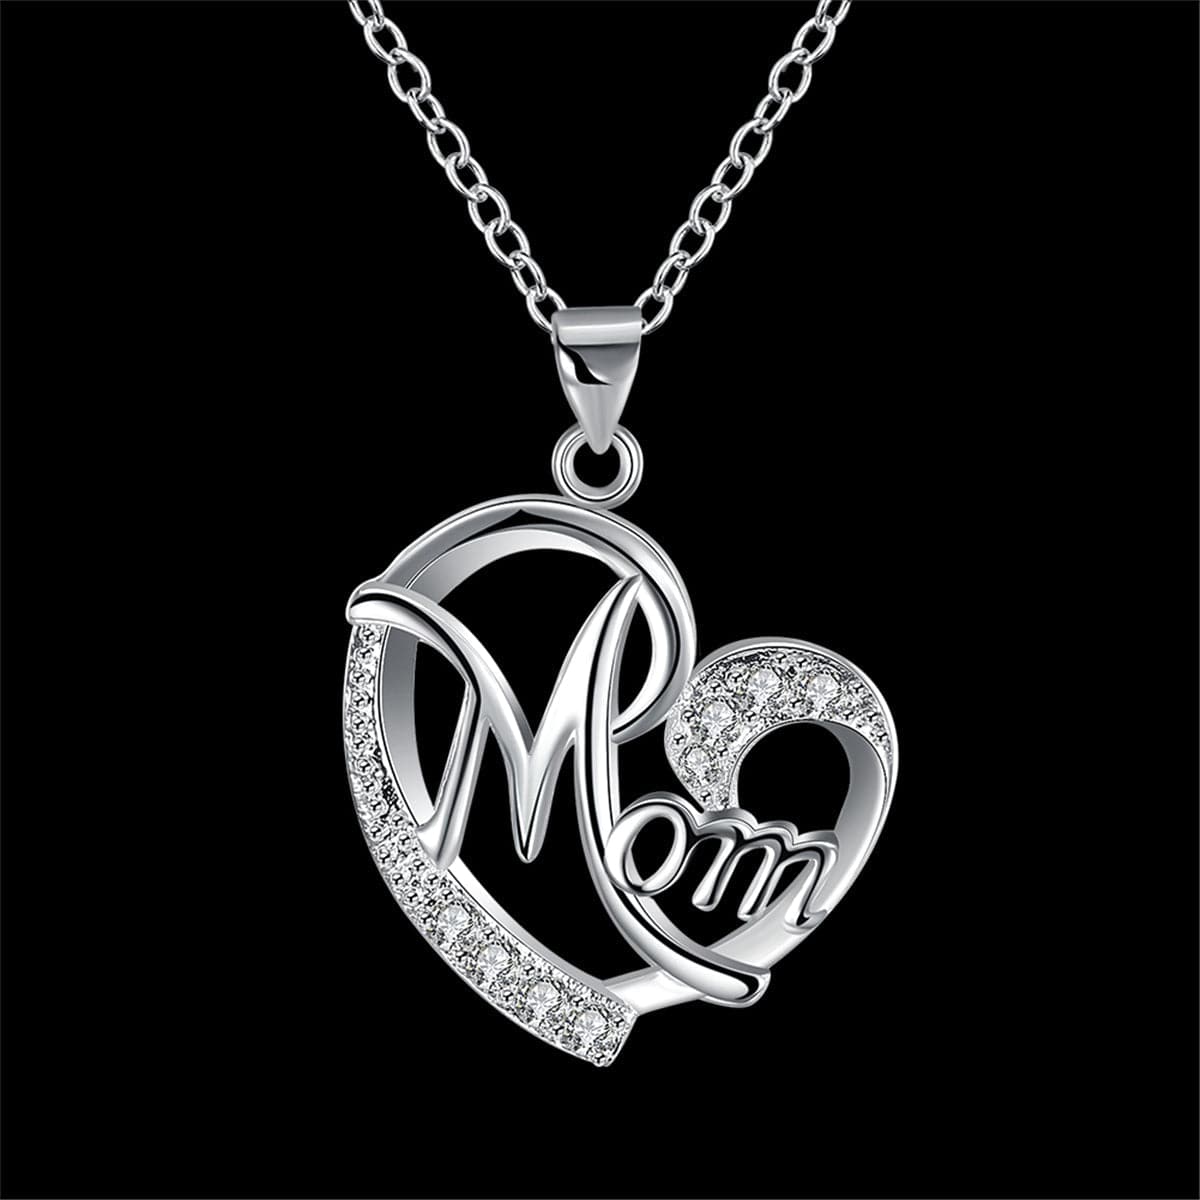 Cubic Zirconia & Silver-Plated 'Mom' Pendant Necklace - streetregion